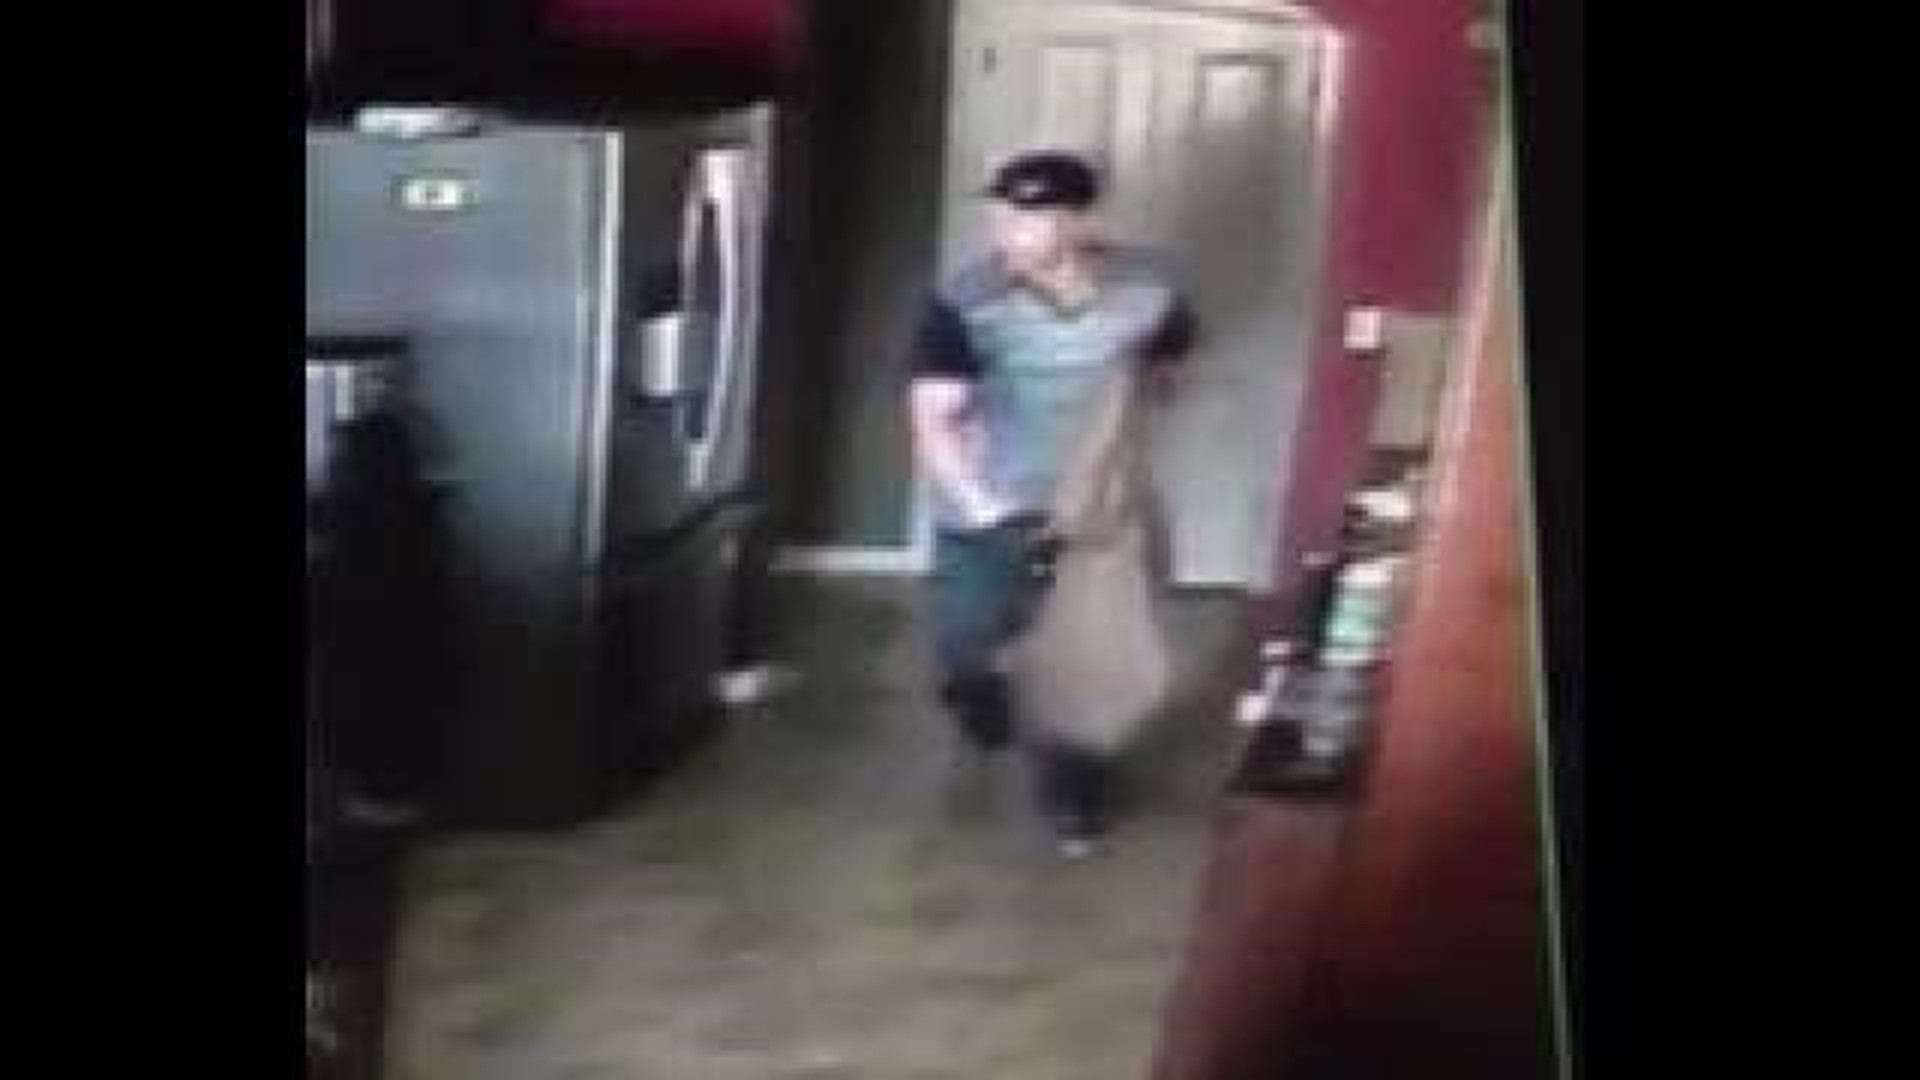 1 Arrested, 1 On The Loose In Burglary Caught On Tape